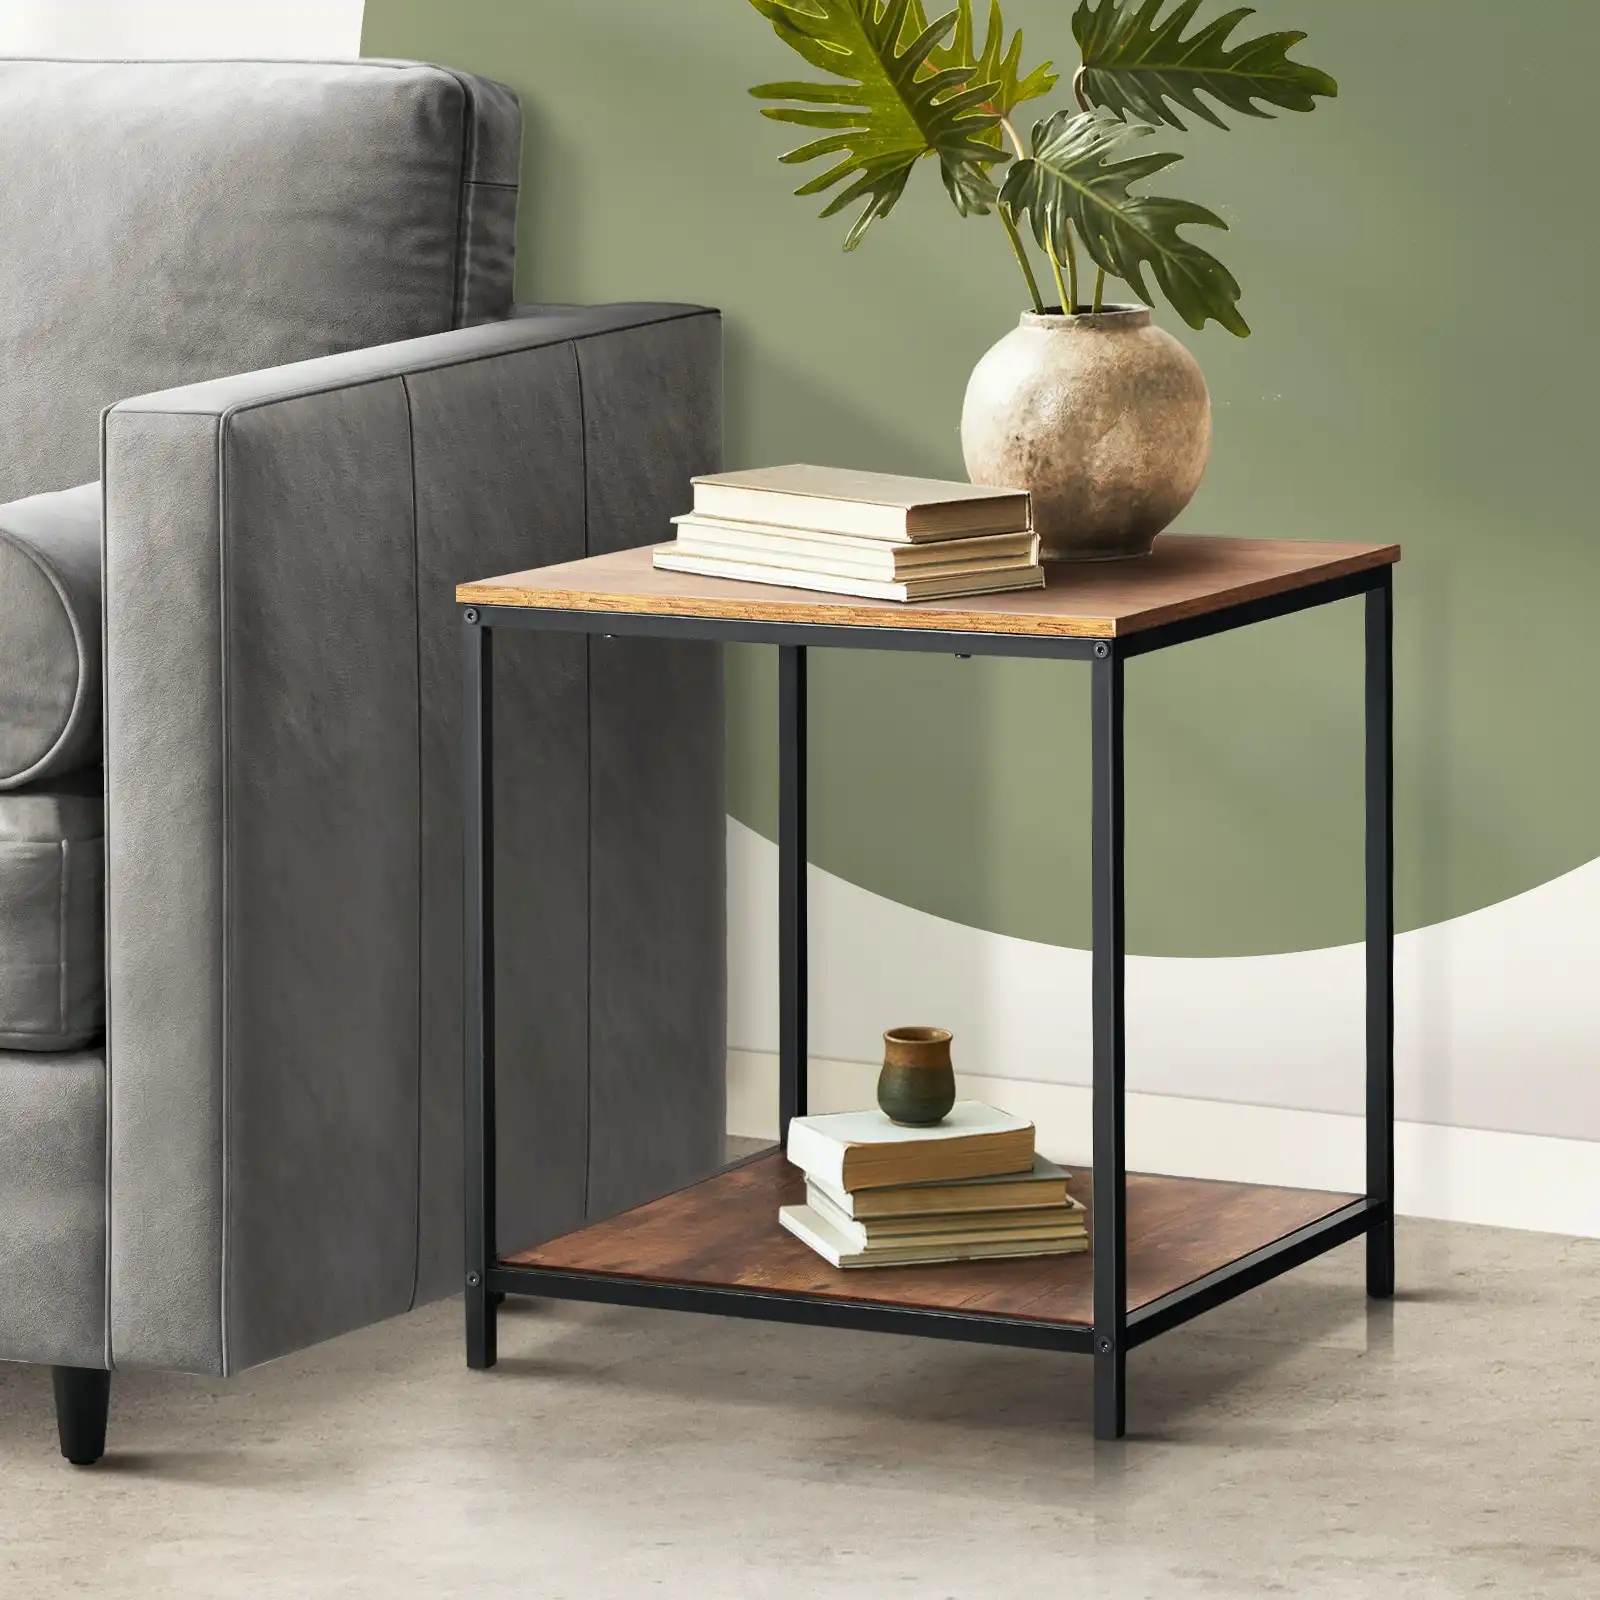 Oikiture Side End Table Coffee Table Bedside Shelf 2-Tier Industrial Furniture